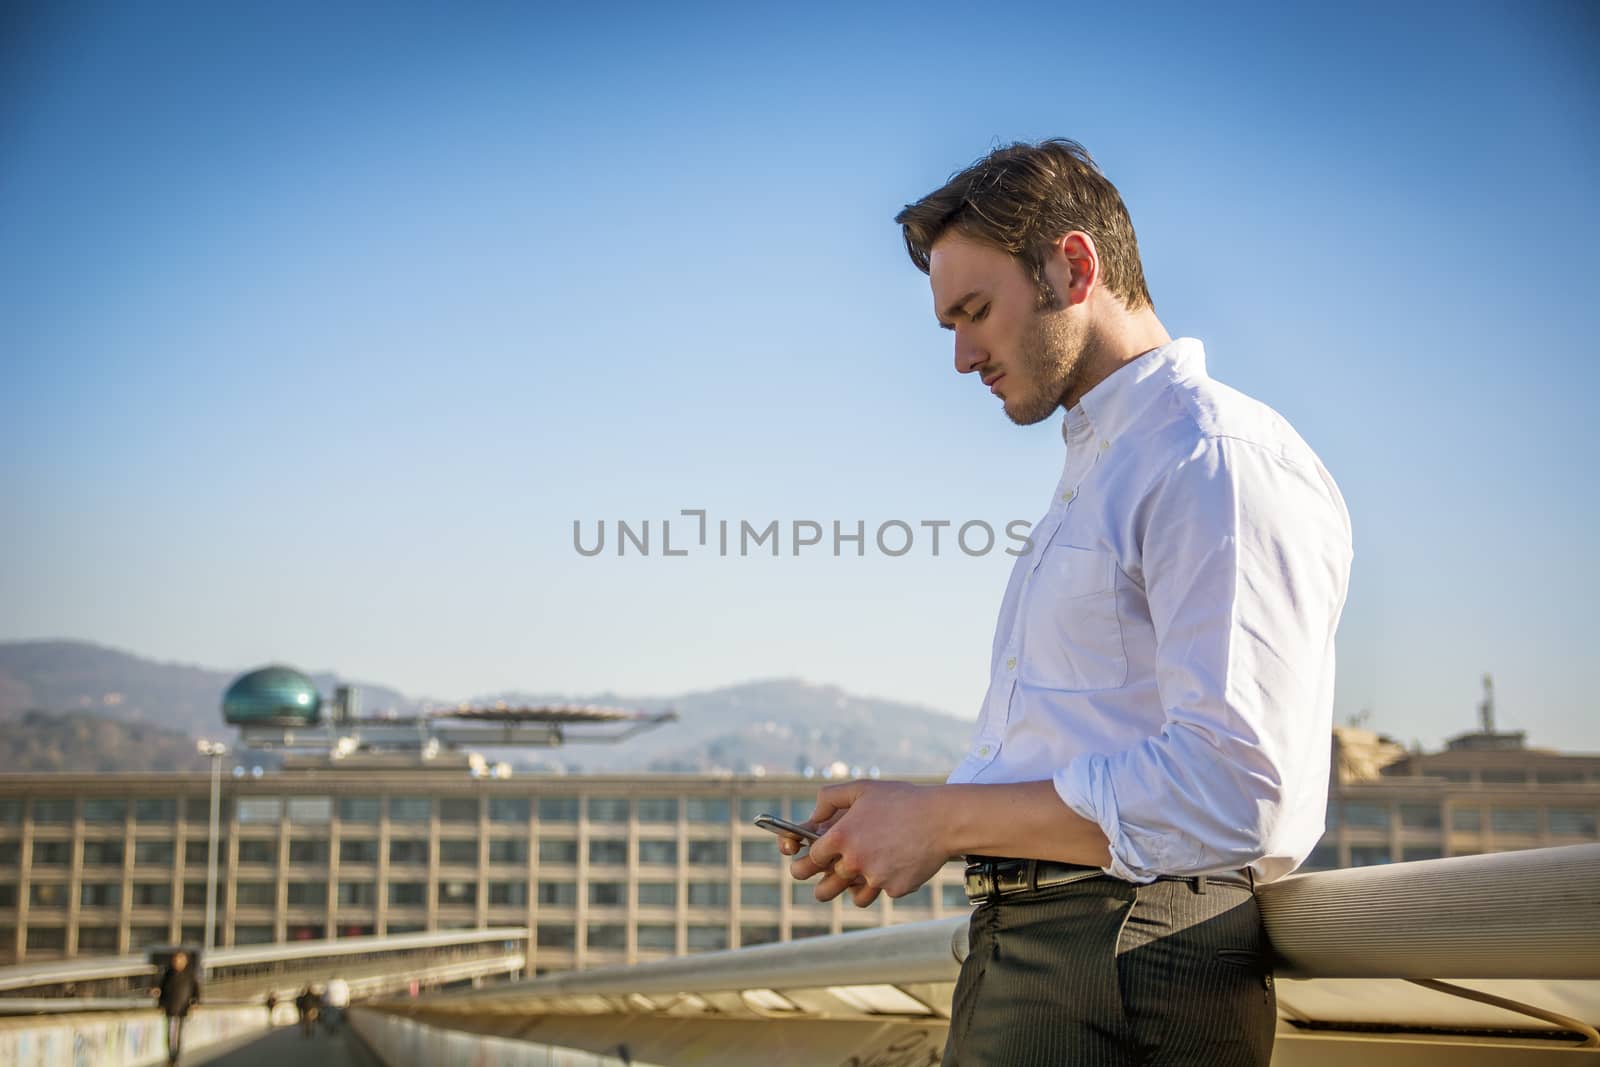 Handsome trendy man wearing white shirt standing and looking down at a cell phone that he is holding, outdoor in city setting